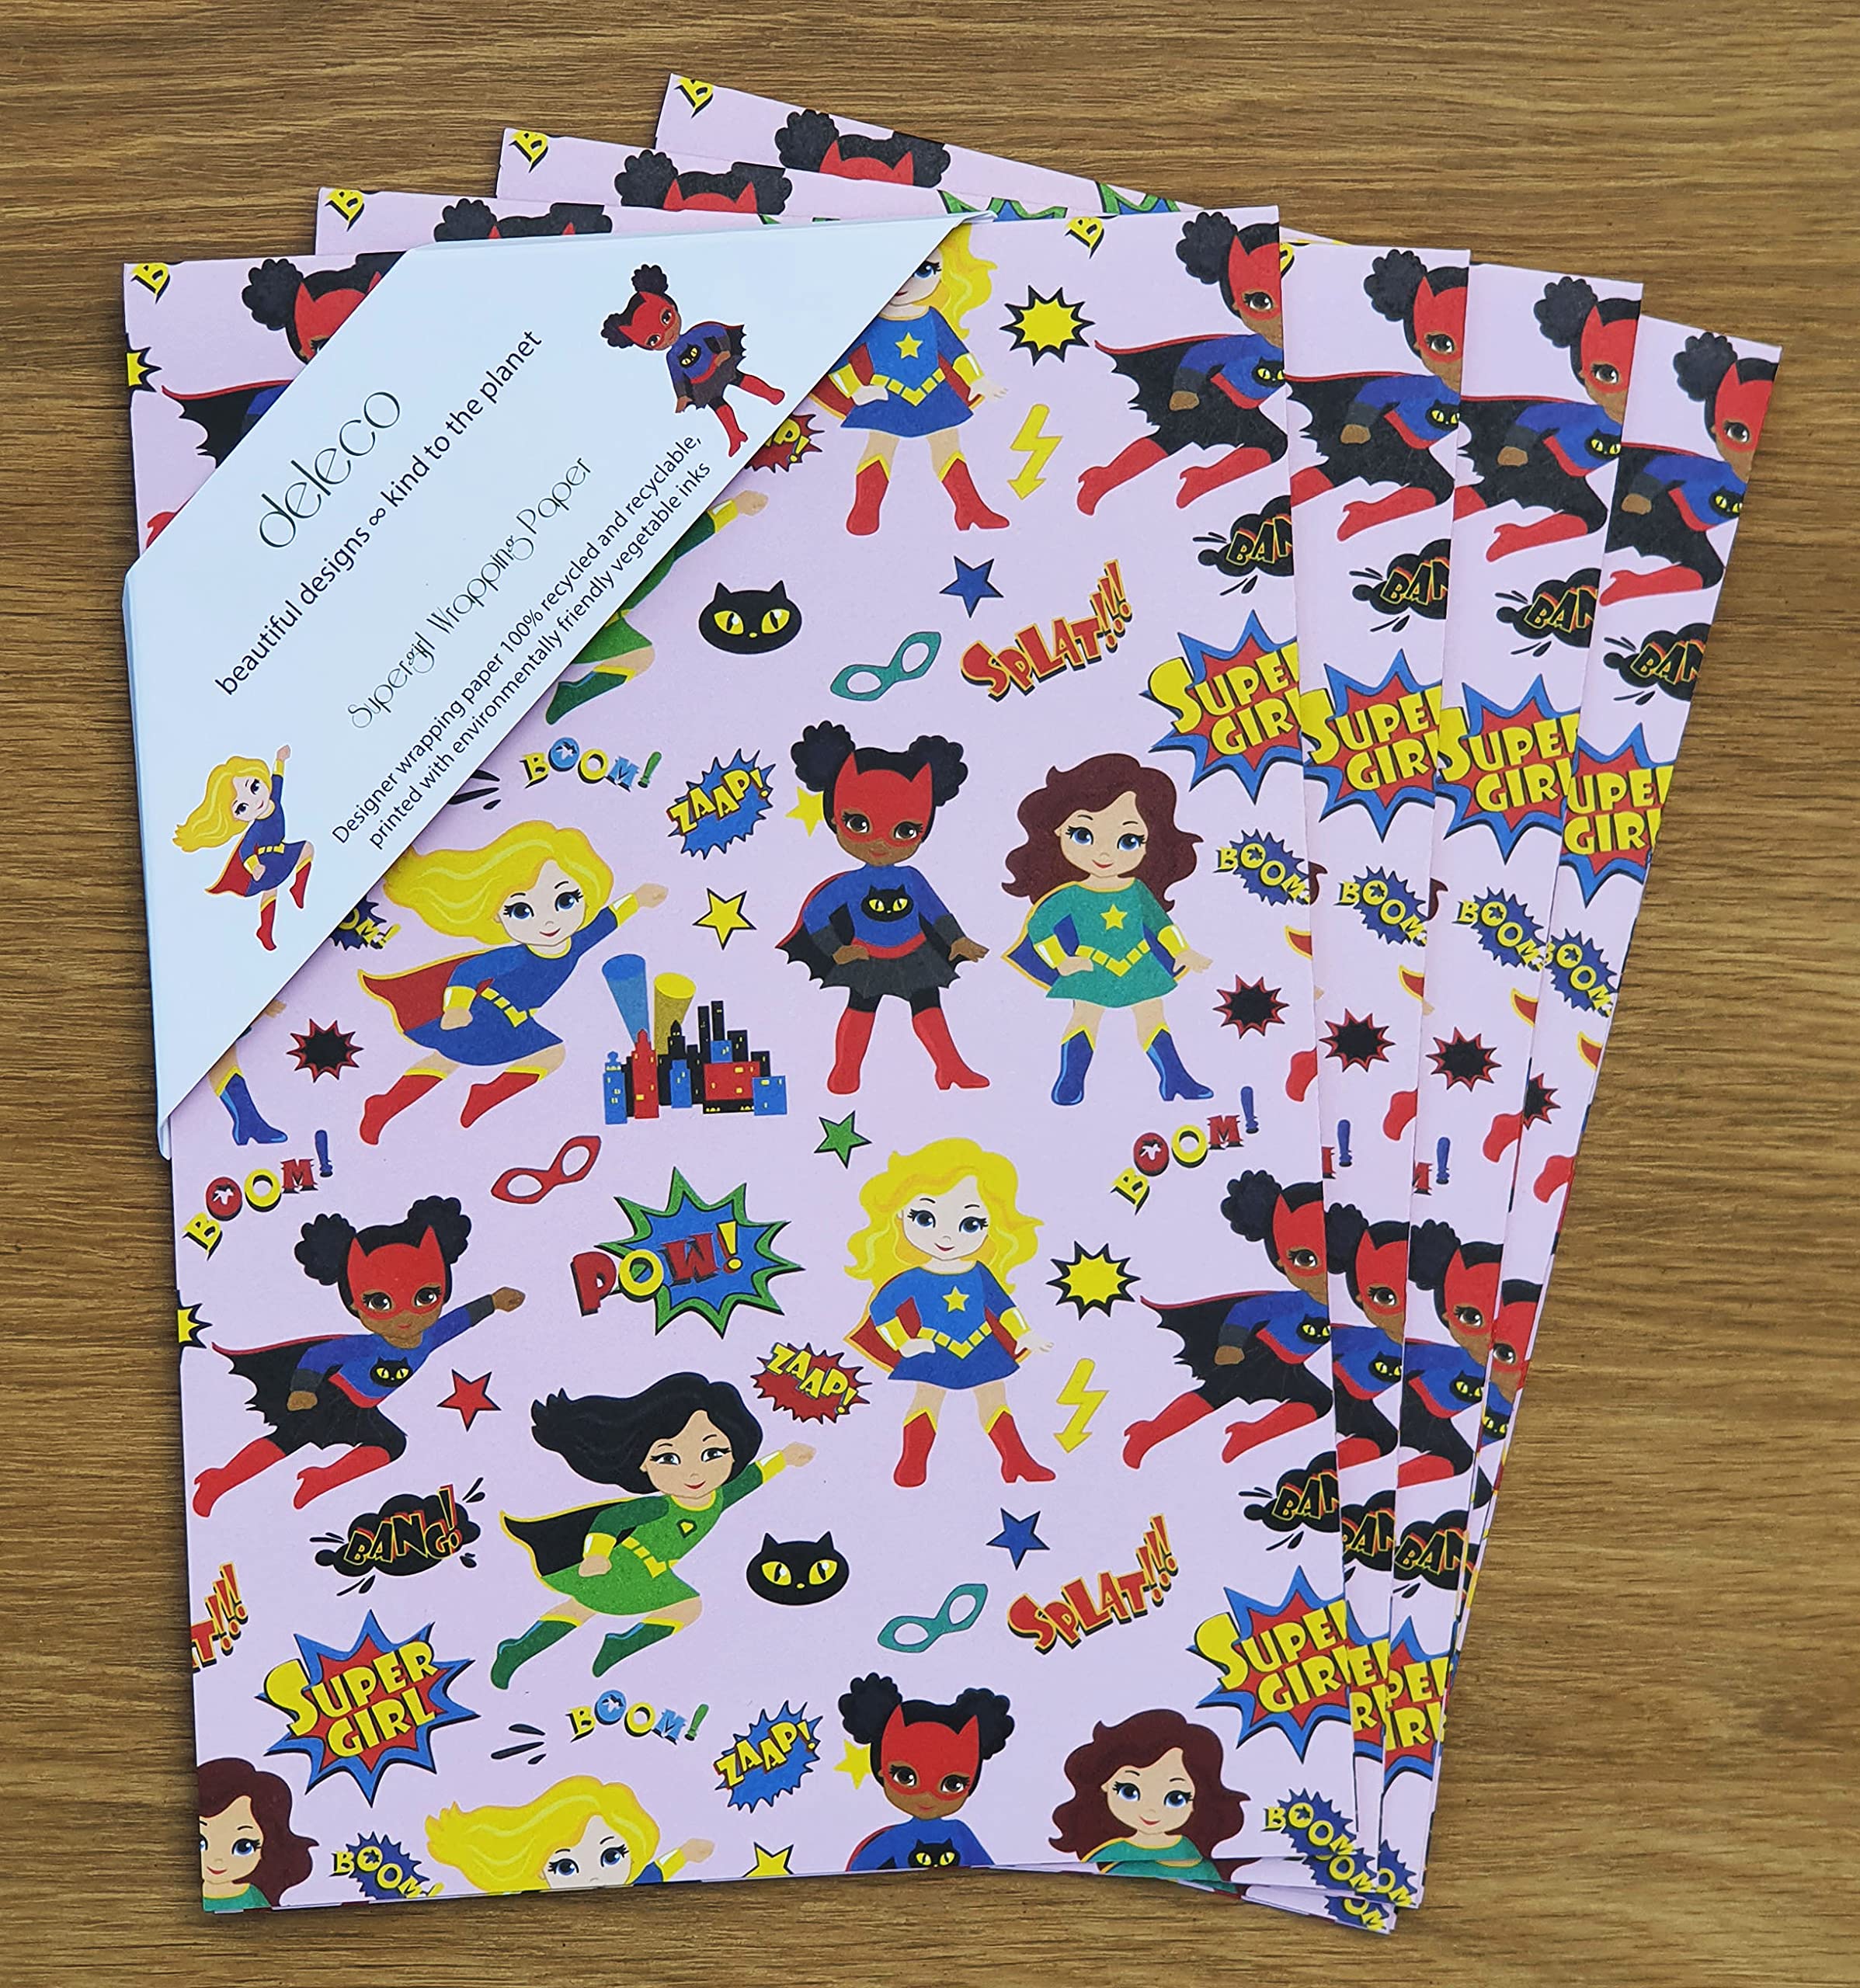 4 x Superhero Multicultural Wrapping Paper for Kids, Girls & Women- Premium 100% Recycled and Recyclable Gift Wrap Sheets 70x50cm for Christmas, Birthday, Anniversary, Thank You & More